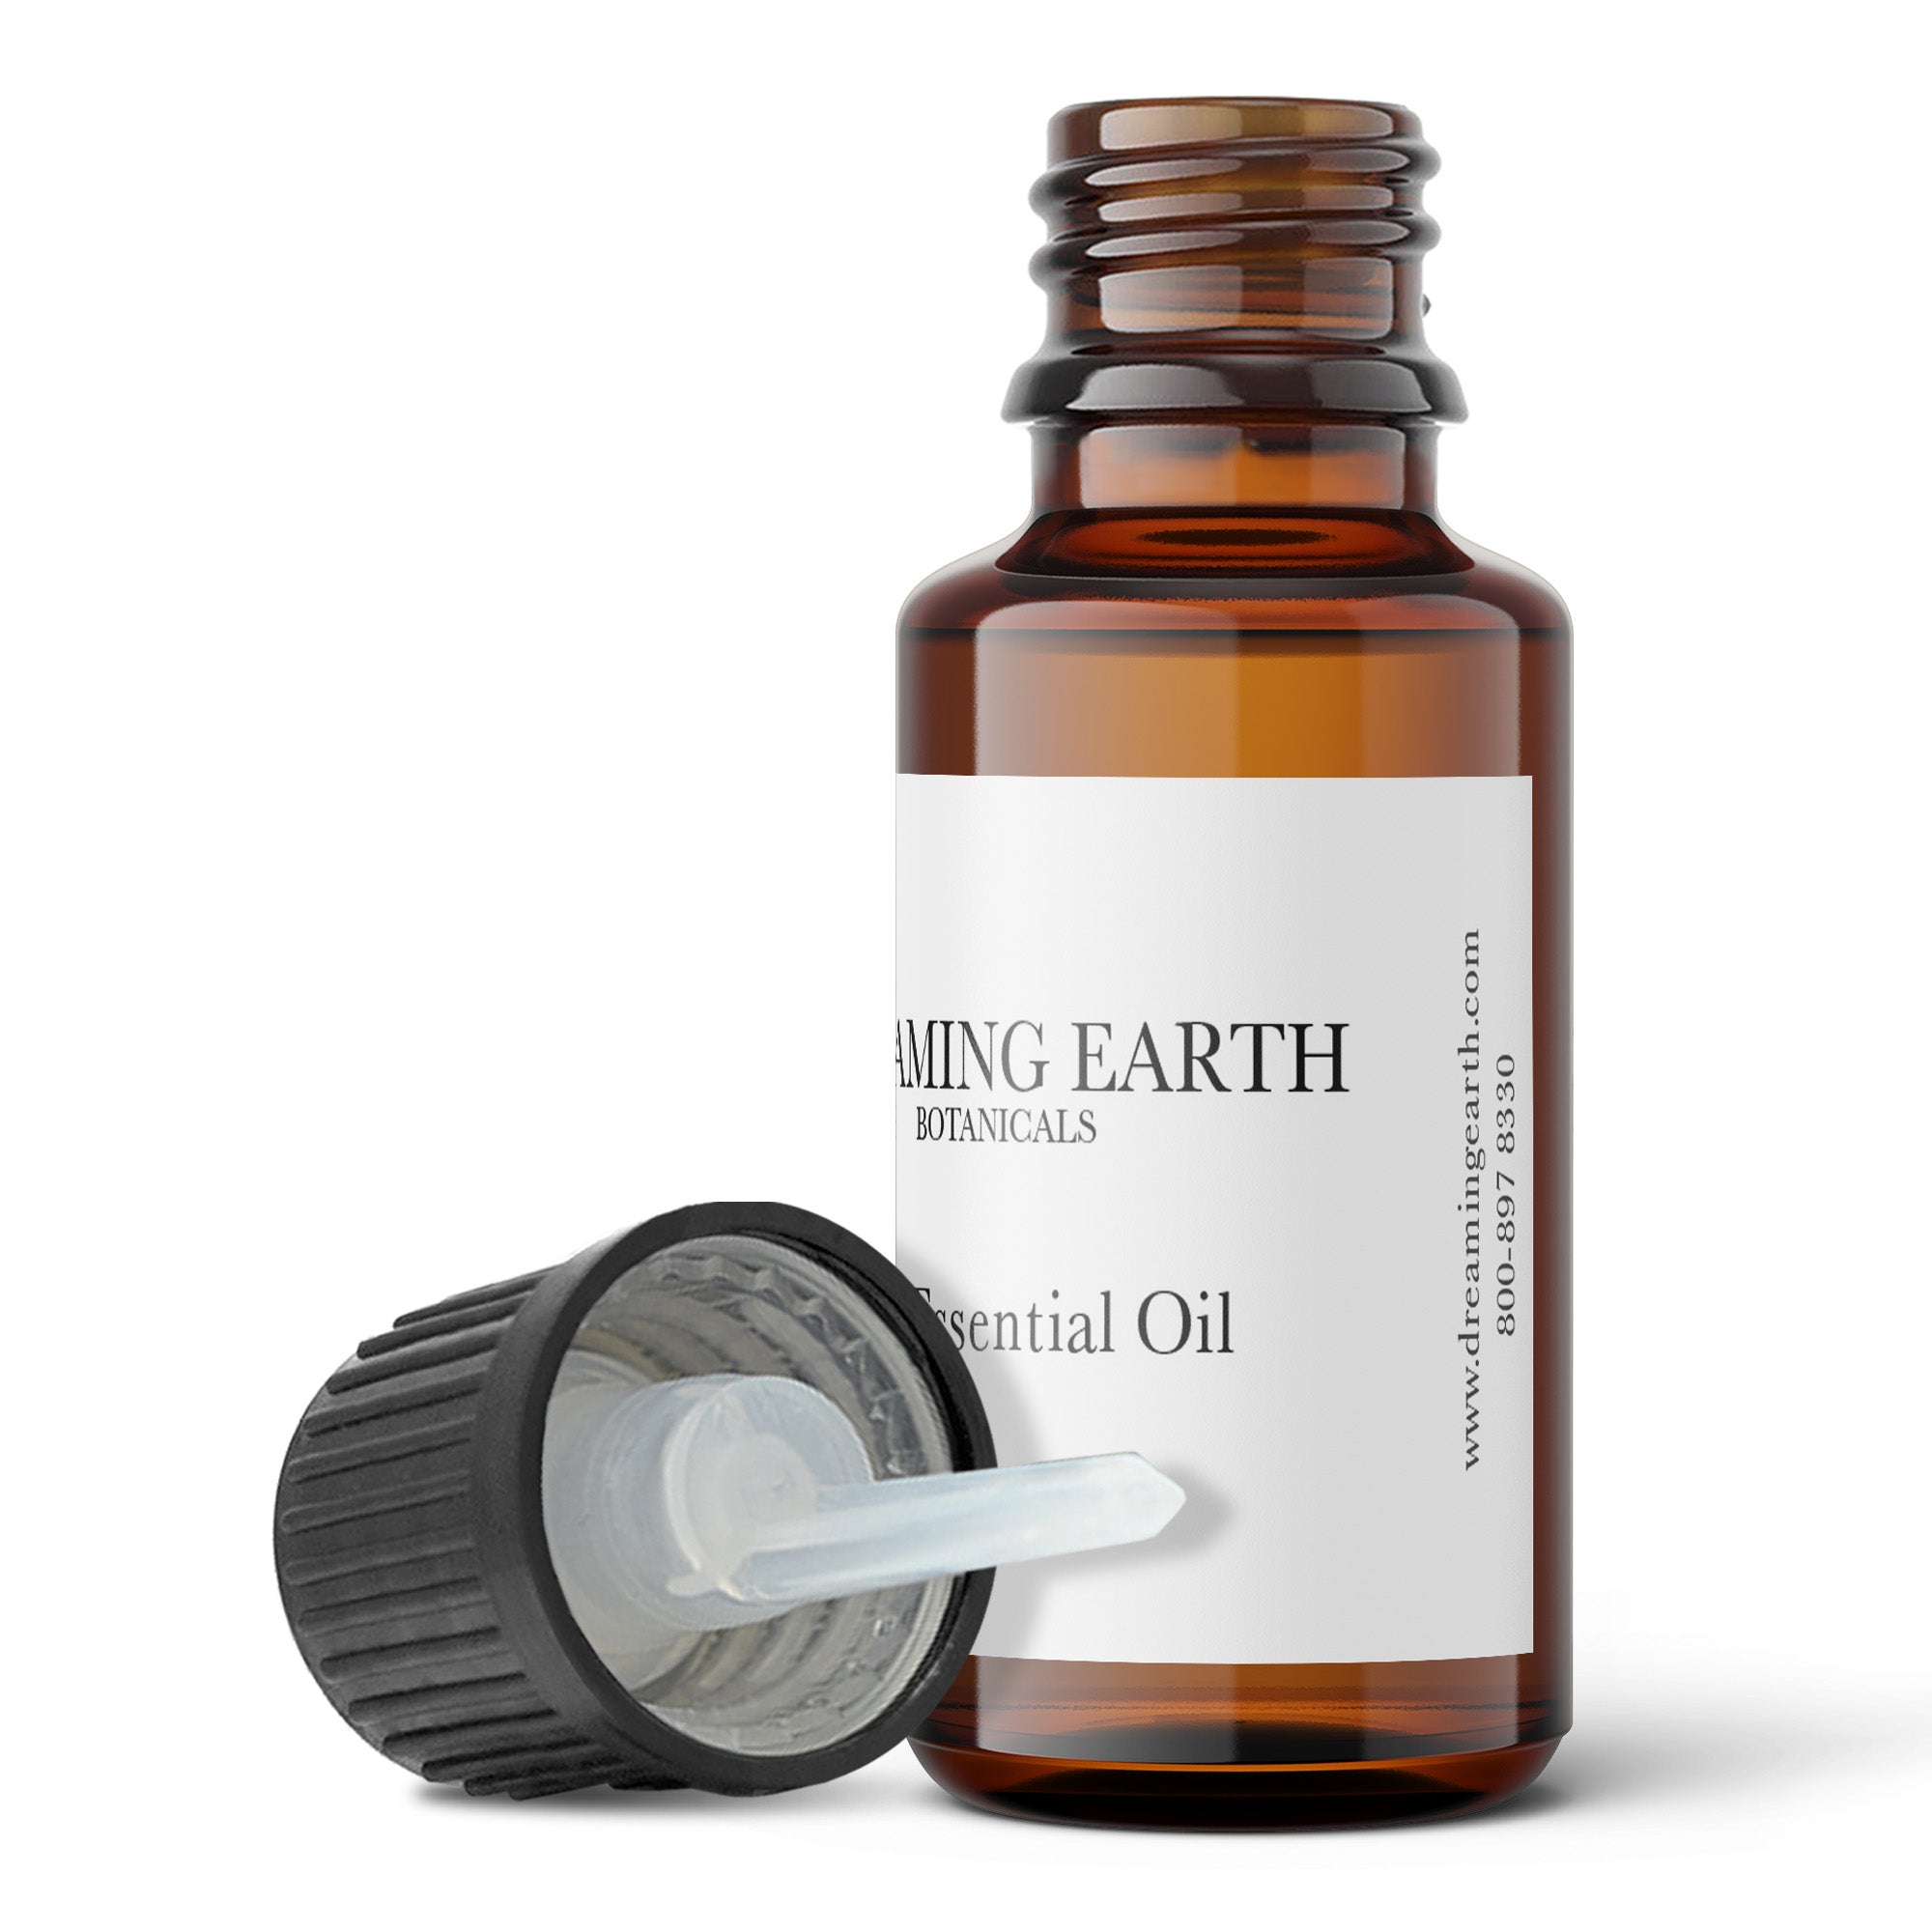 Load image into Gallery viewer, Citronella Essential Oil - Dreaming Earth Inc
